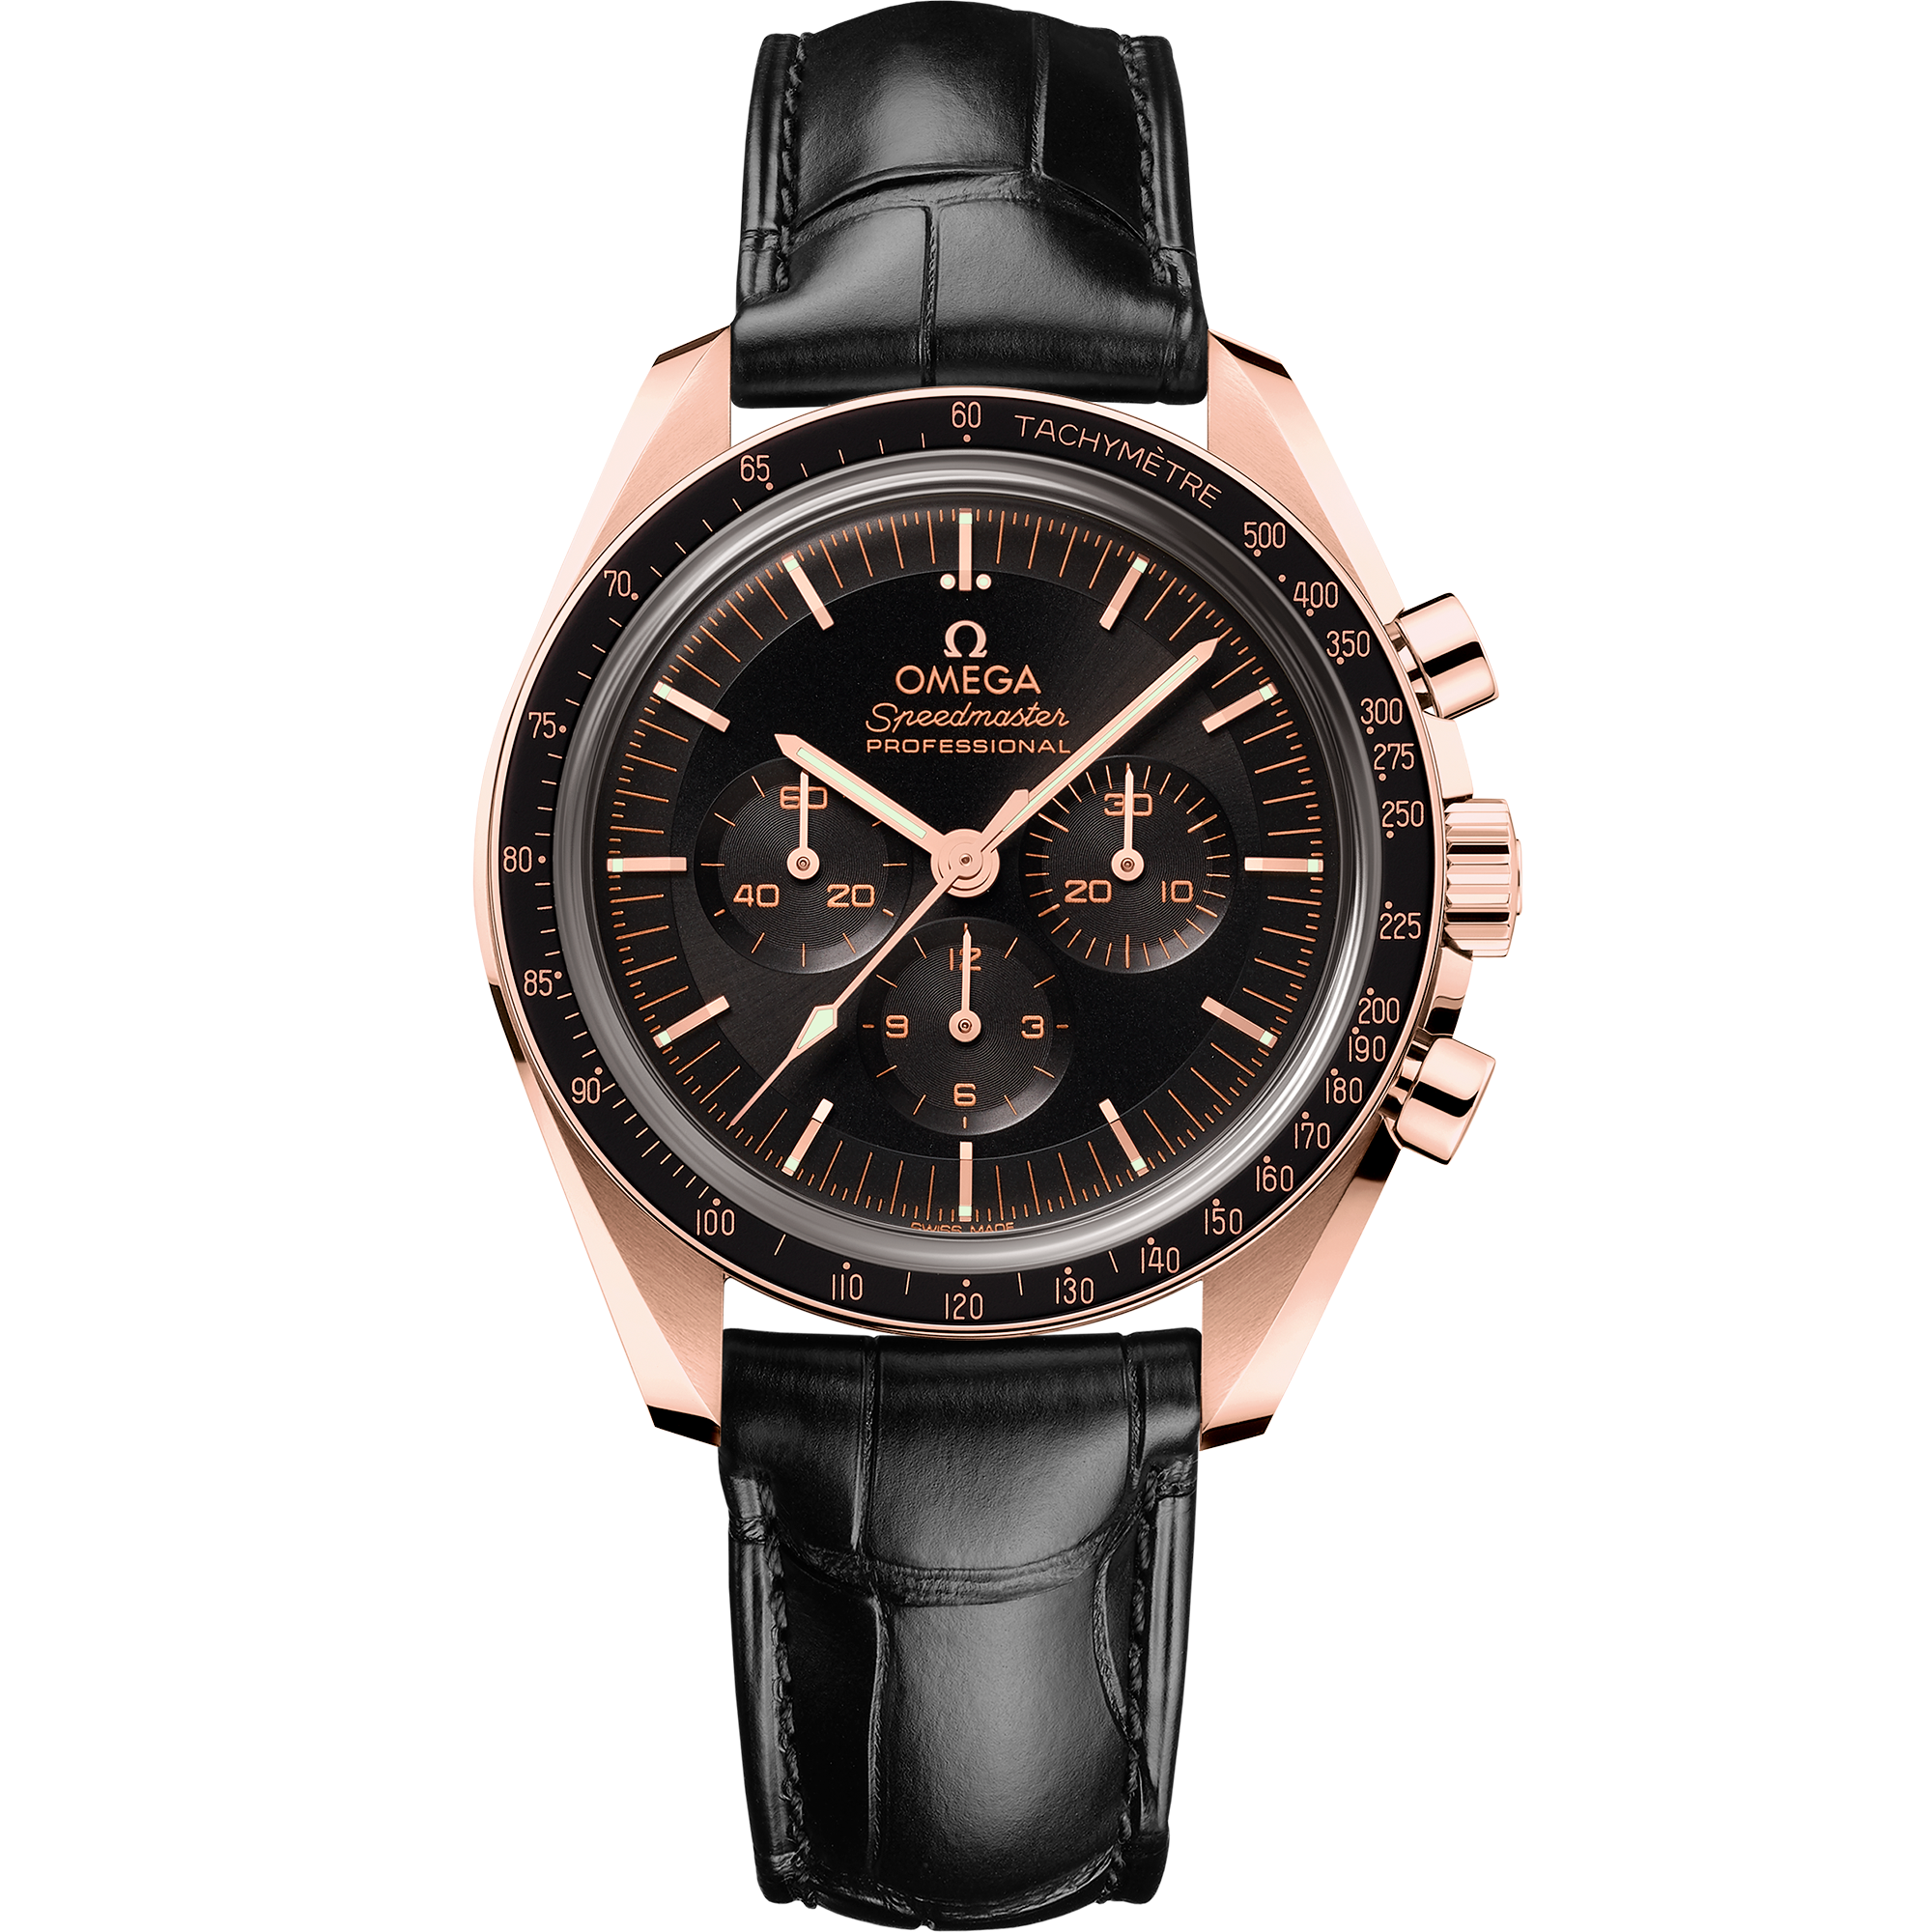 Speedmaster Moonwatch Professional 42 mm, Sedna™ gold on leather strap - 310.63.42.50.01.001